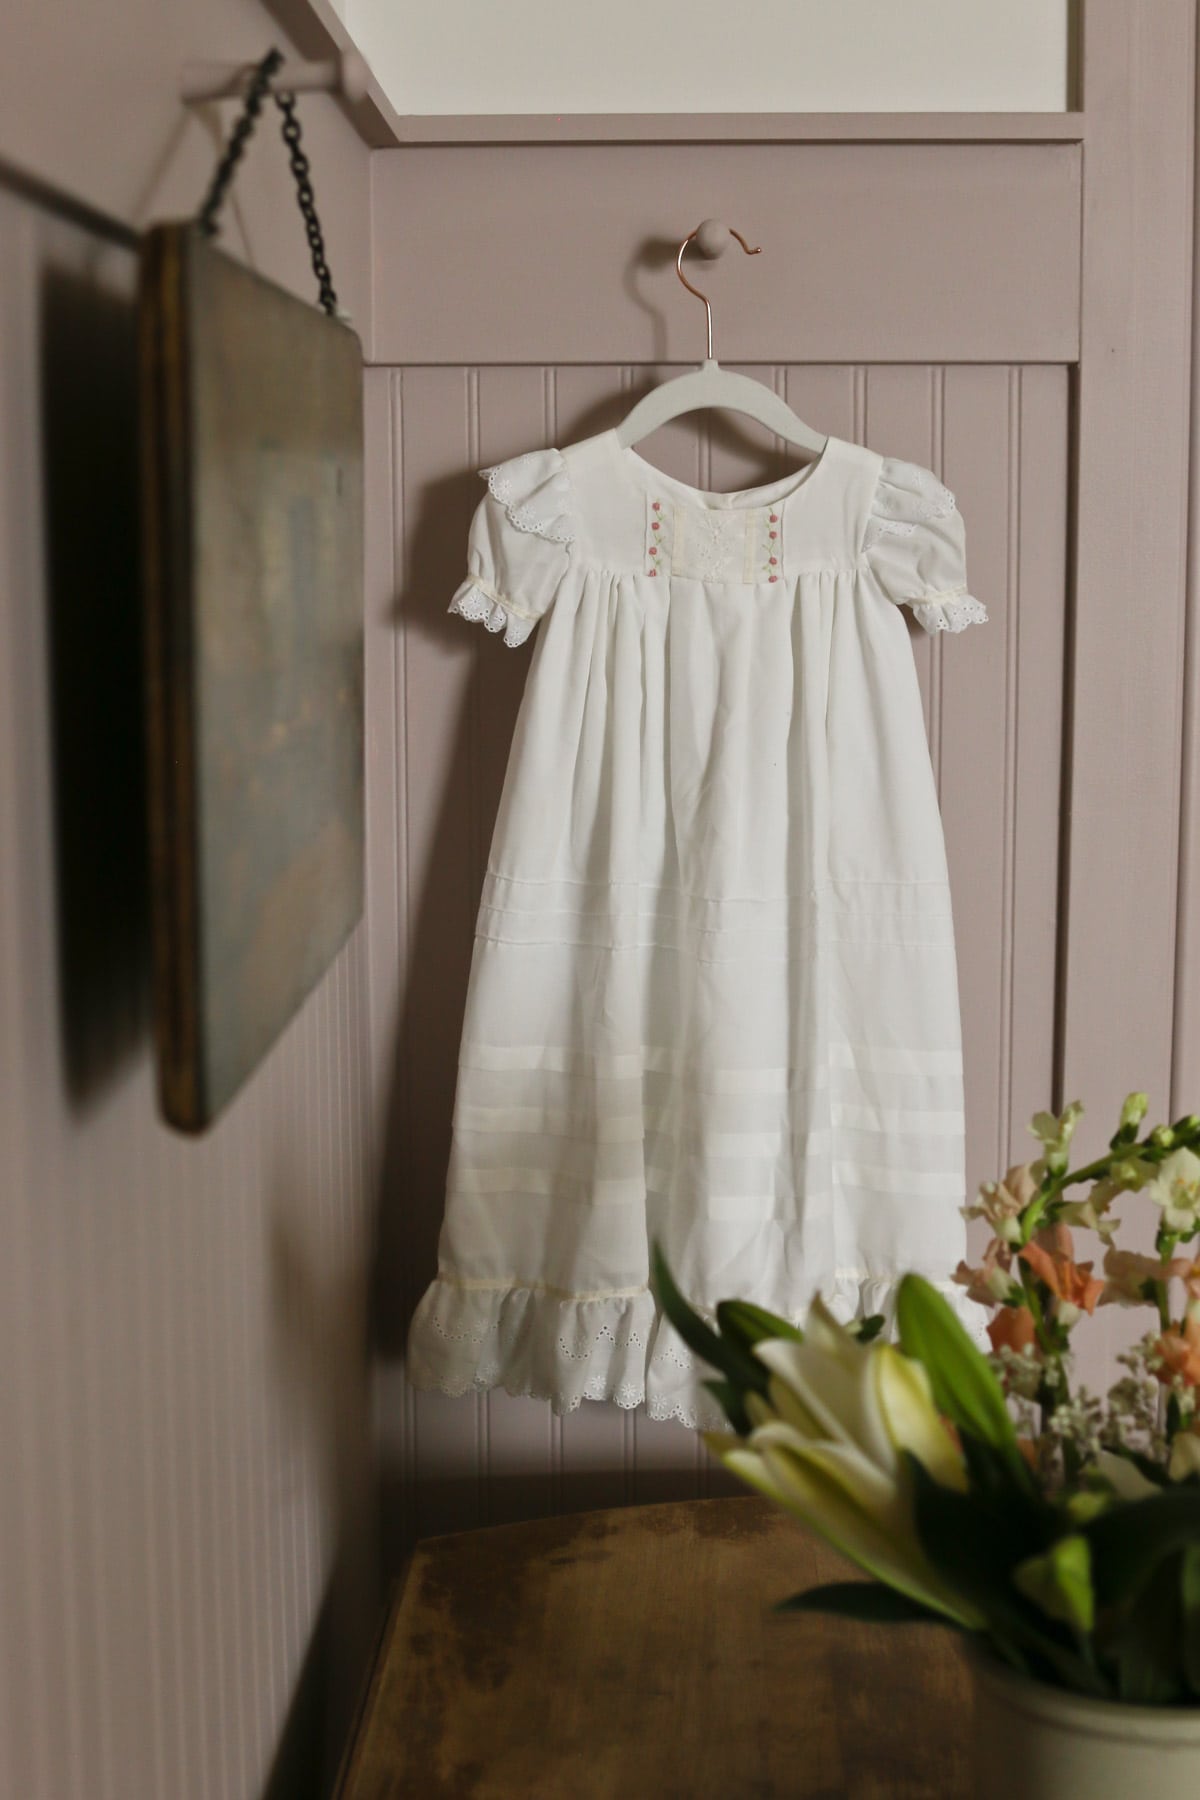 Baby blessing dress on display